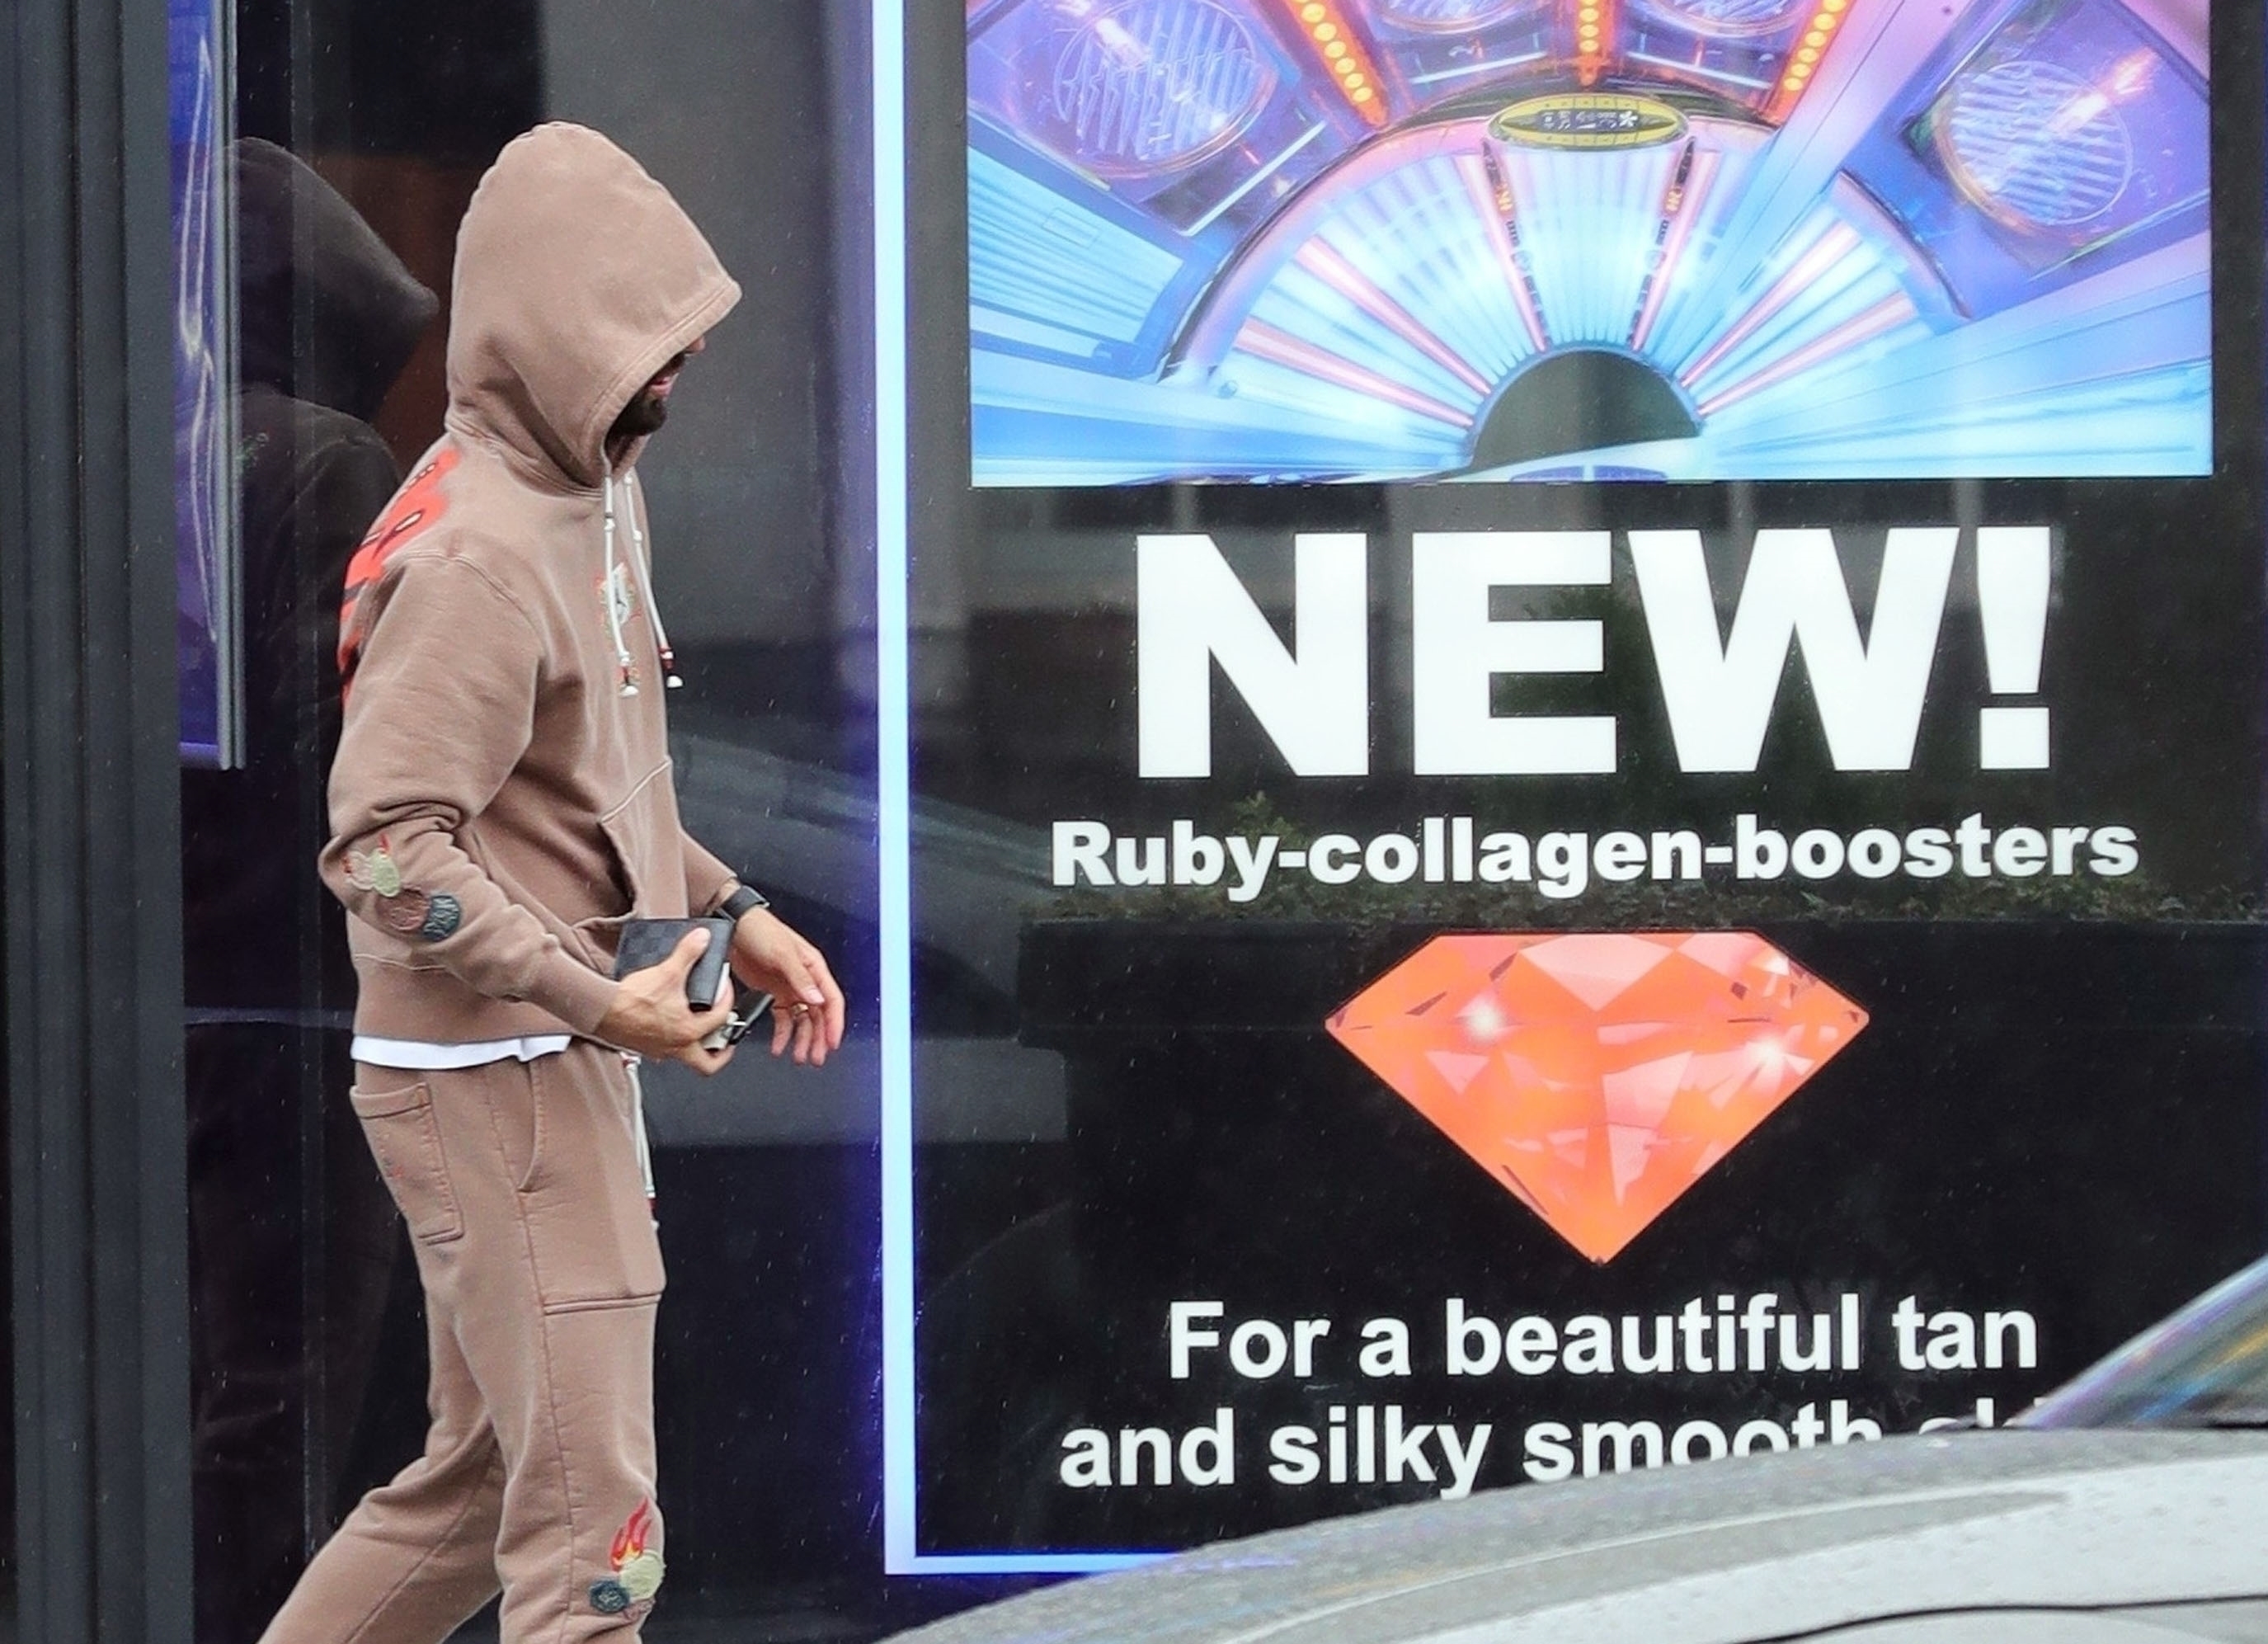 The shop had a huge advertisement for it's new 'ruby-collagen-boosters' on its window